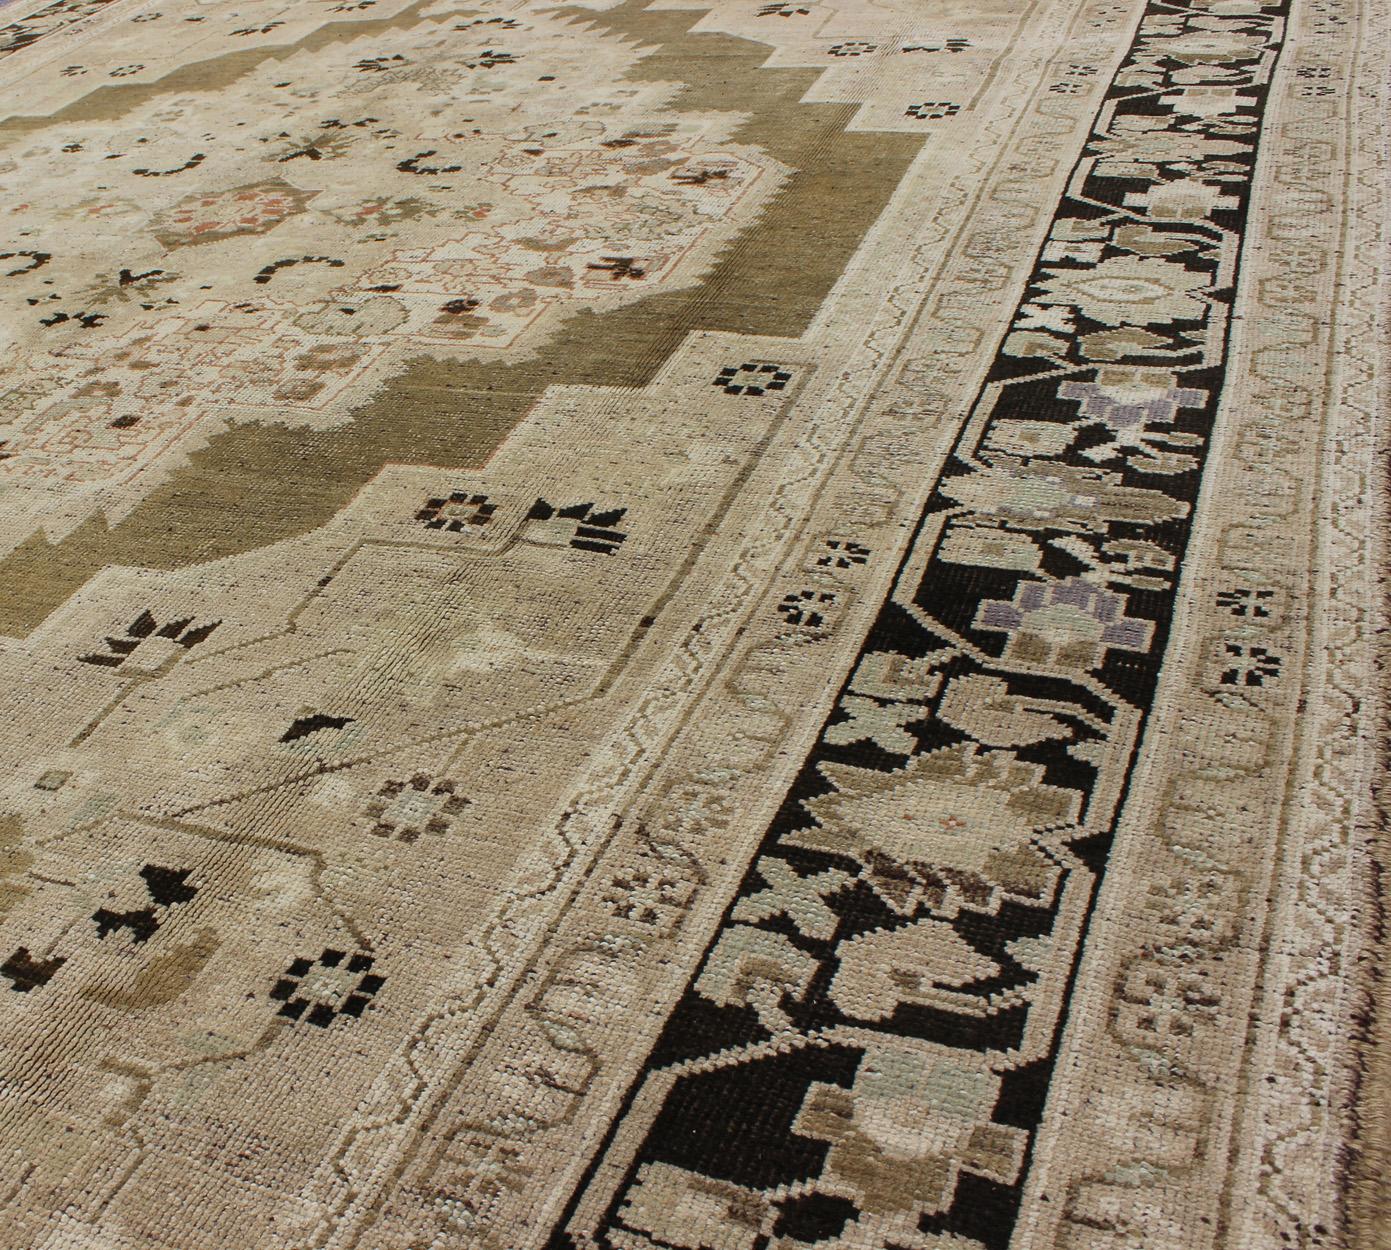 Measures: 8'0 x 11'0

This vintage Turkish Oushak carpet (circa mid-20th century) features a central, multi-layered medallion design, as well as patterns of smaller flowers and floral elements in the four cornices, and in the surrounding borders.